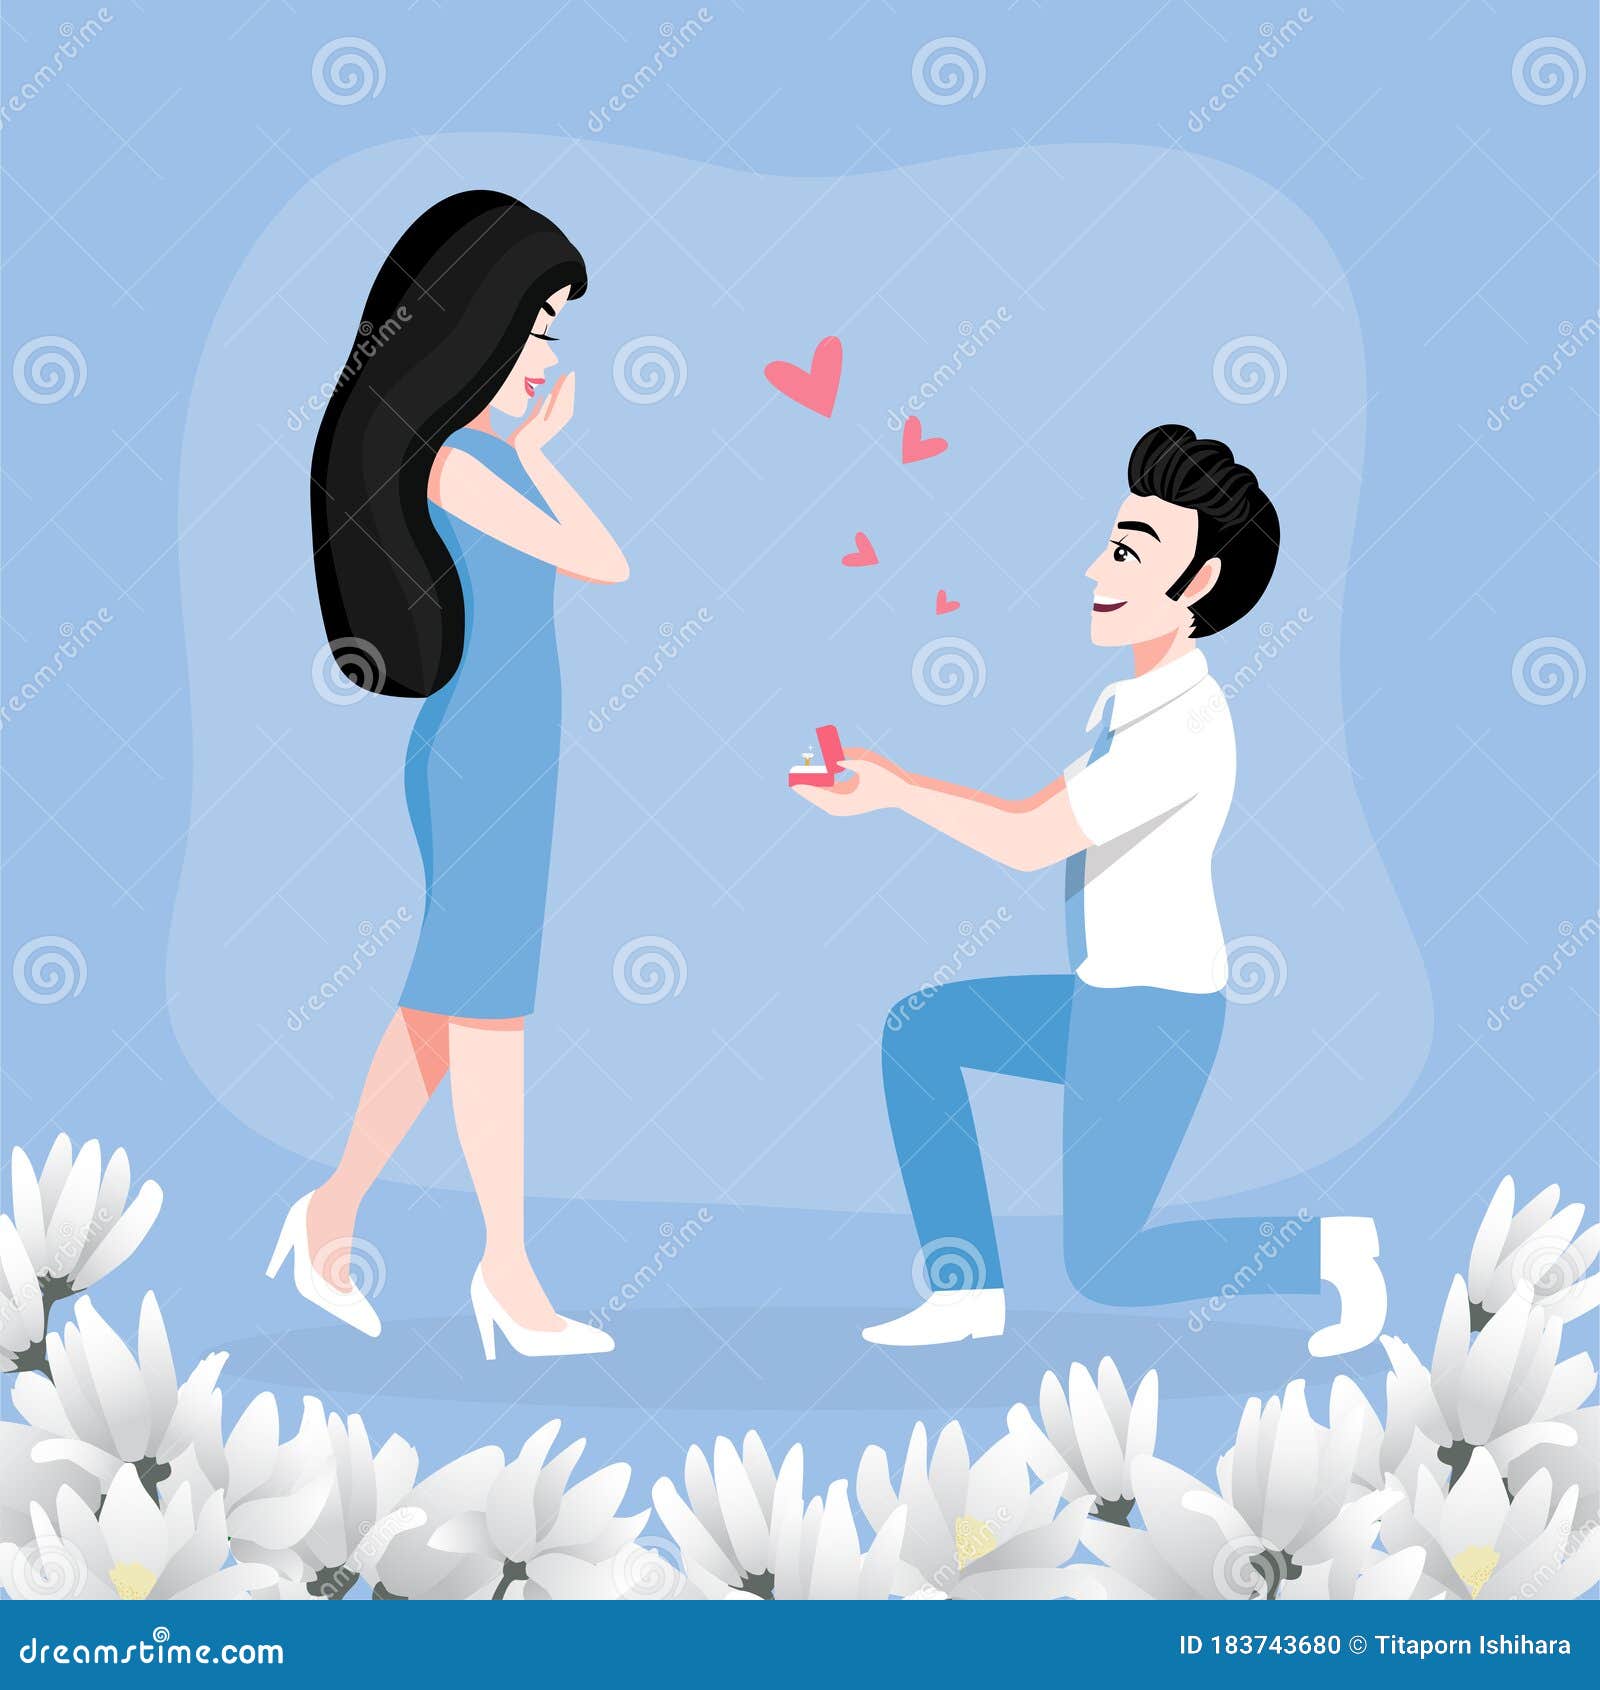 Valentine`s Day Cartoon Character with a Cute Couple in Love, Man Proposing  To the Woman Kneeling Vector Stock Vector - Illustration of adult, lover:  183743680